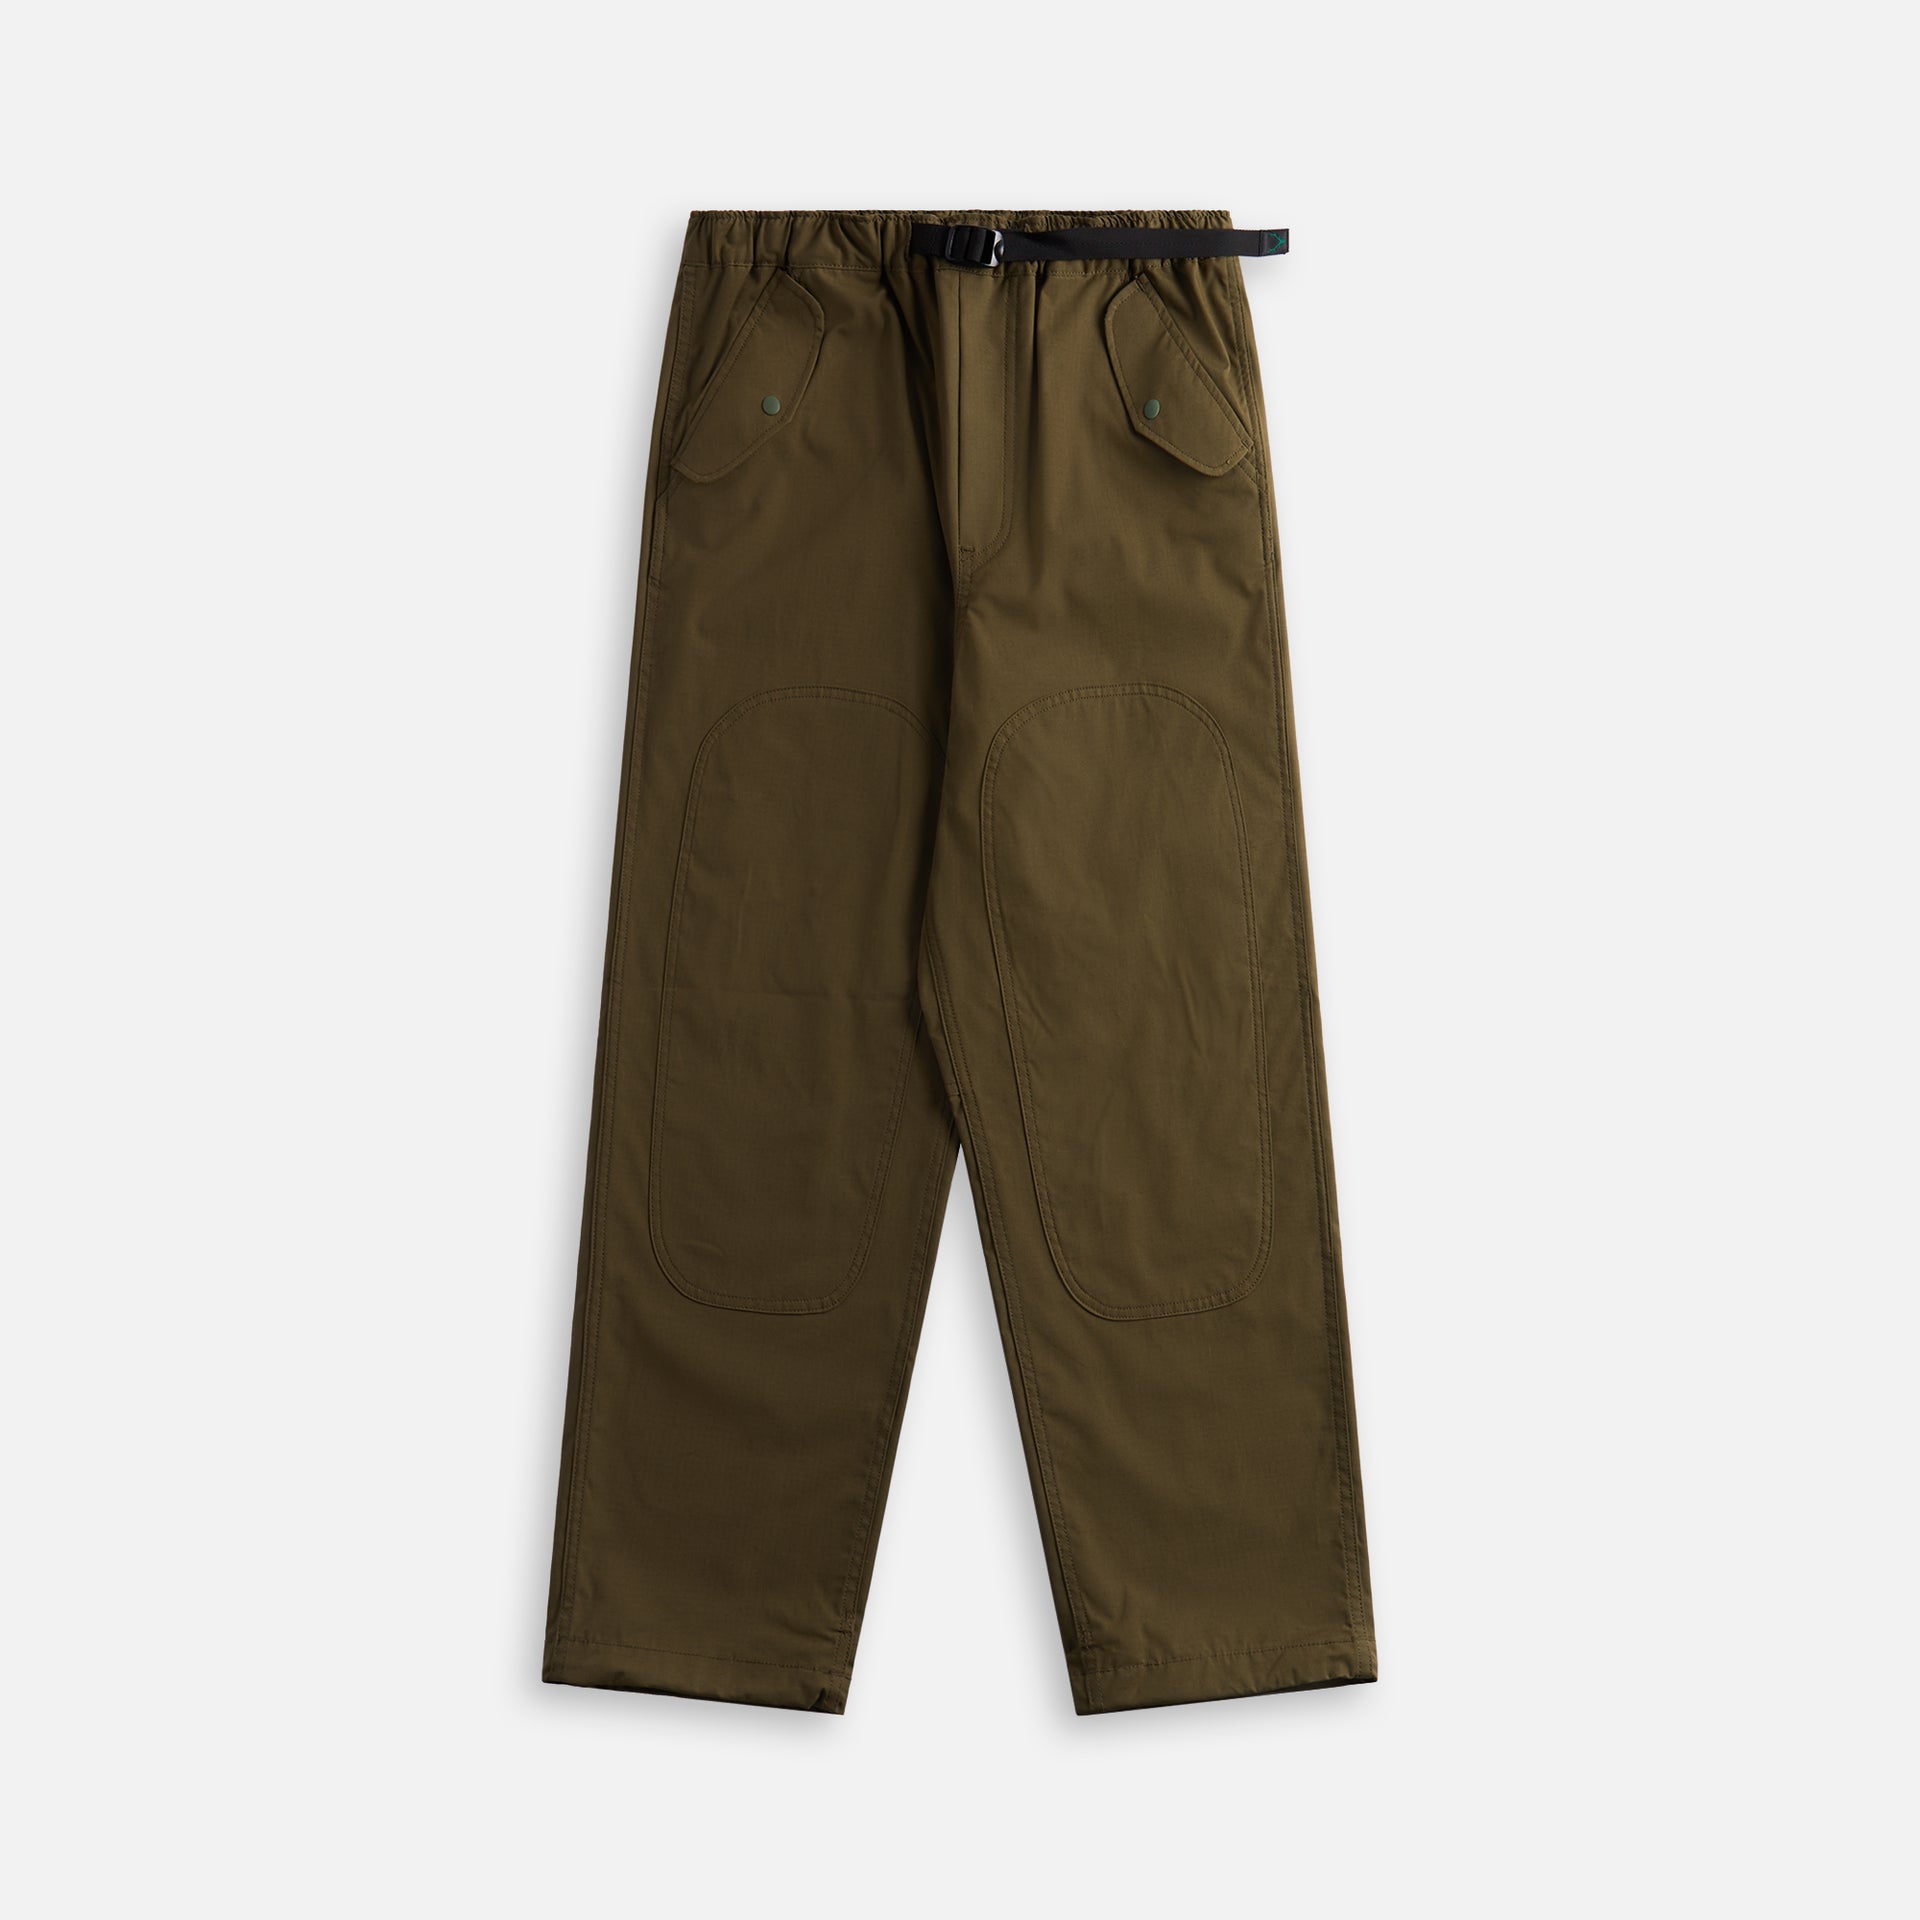 South2 West8 Belted Double Knee Pant CMO Ripstop - Olive